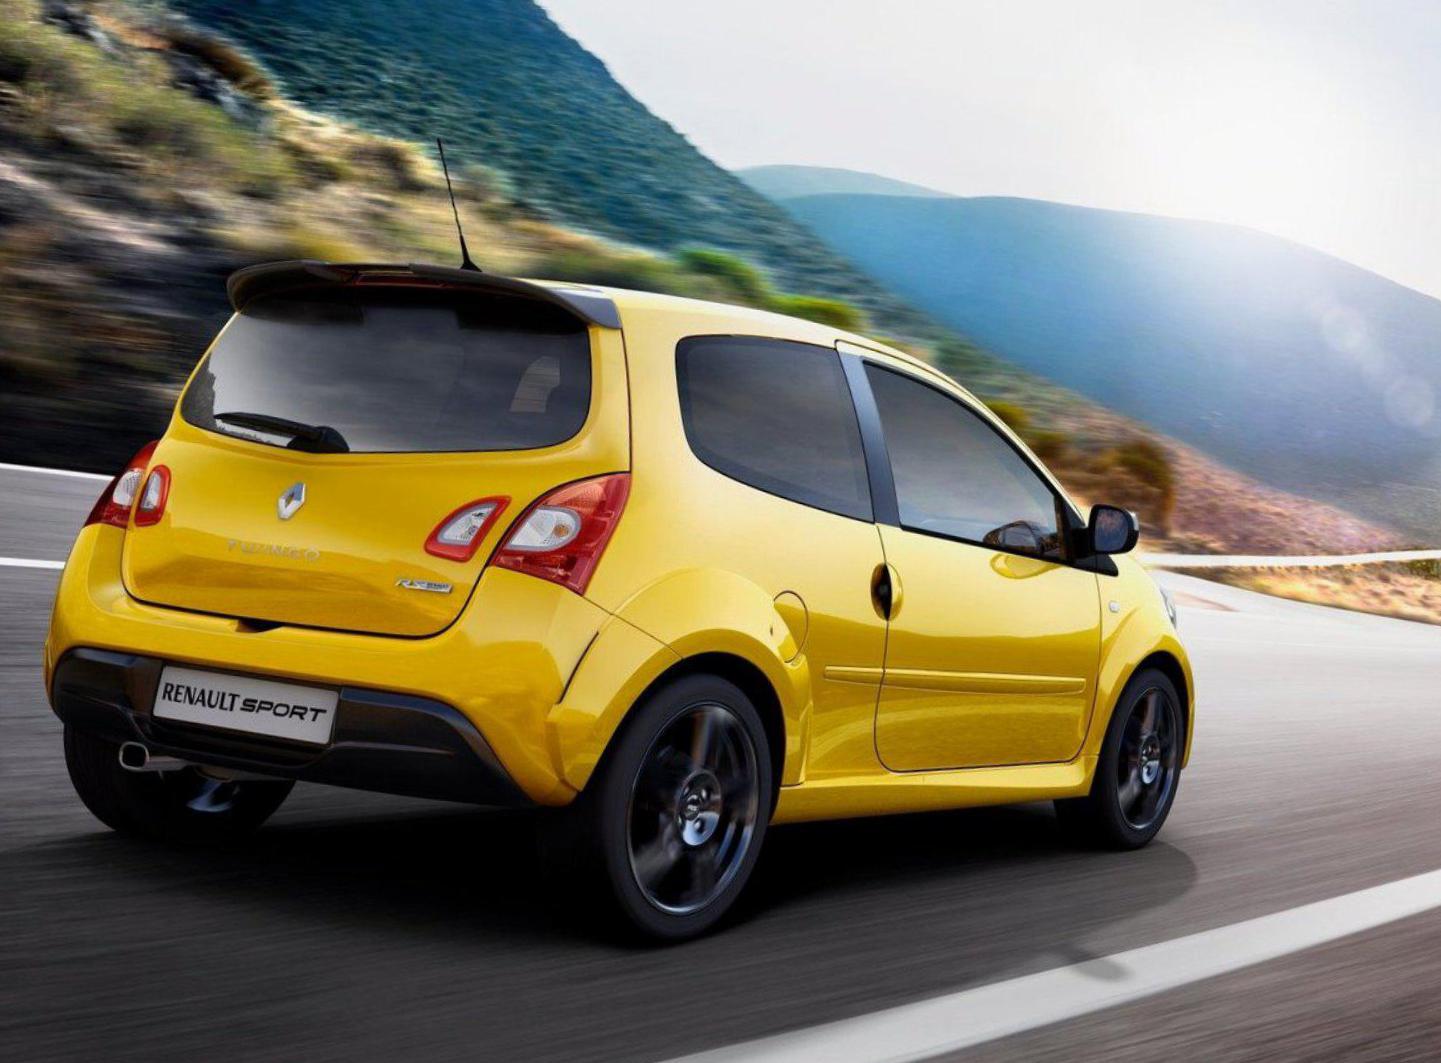 Renault Twingo R.S. review 2006